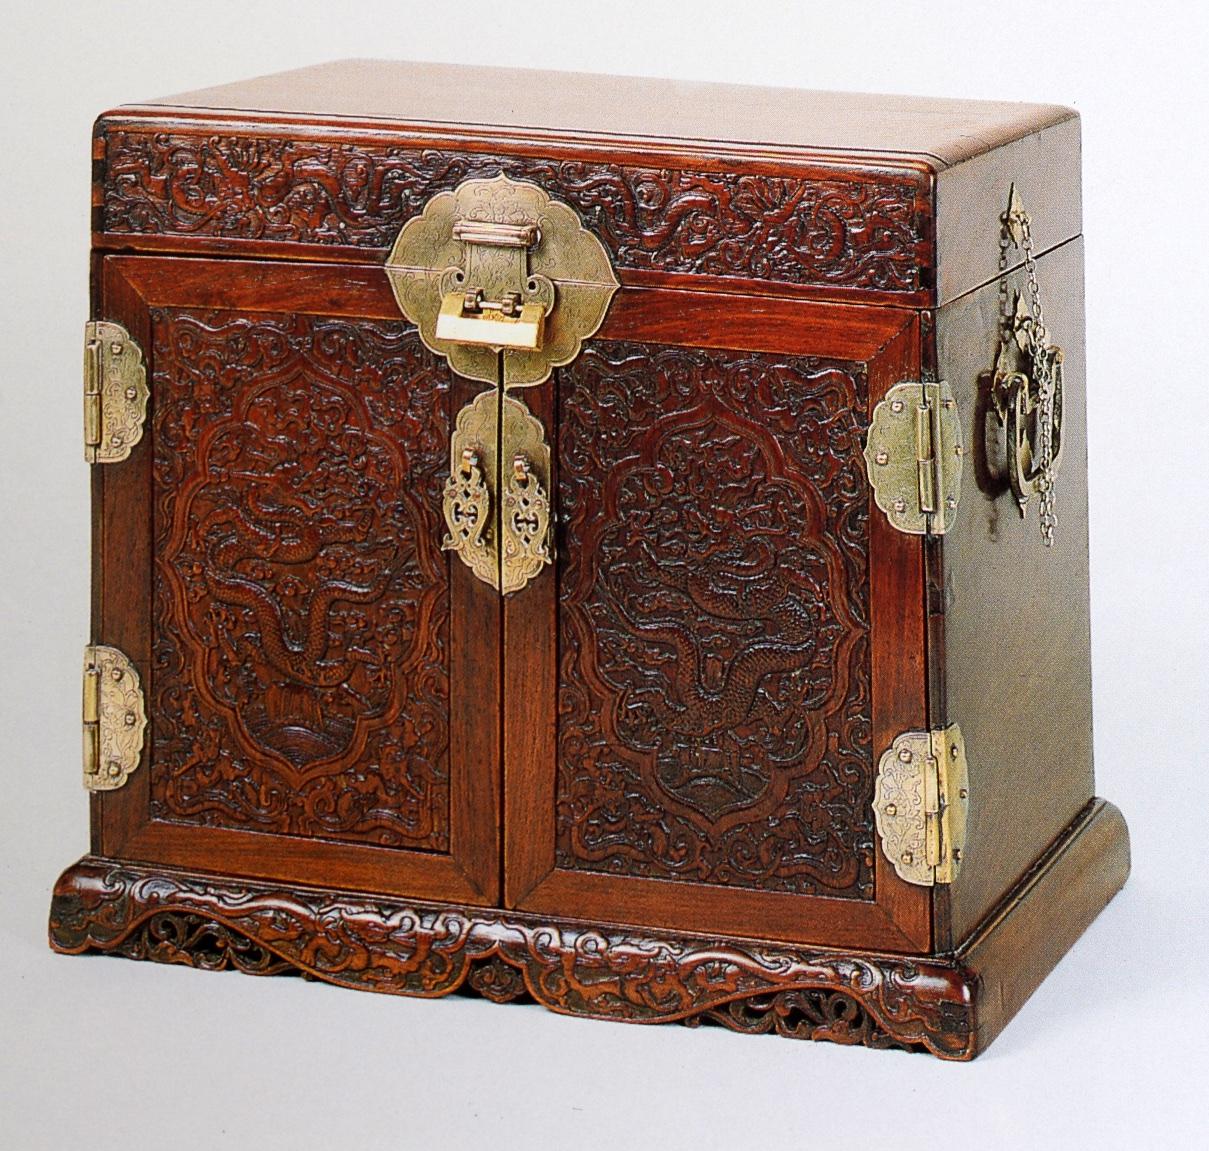 Paper Important Chinese Furniture, Formerly the Museum of Classical Chinese Furniture For Sale